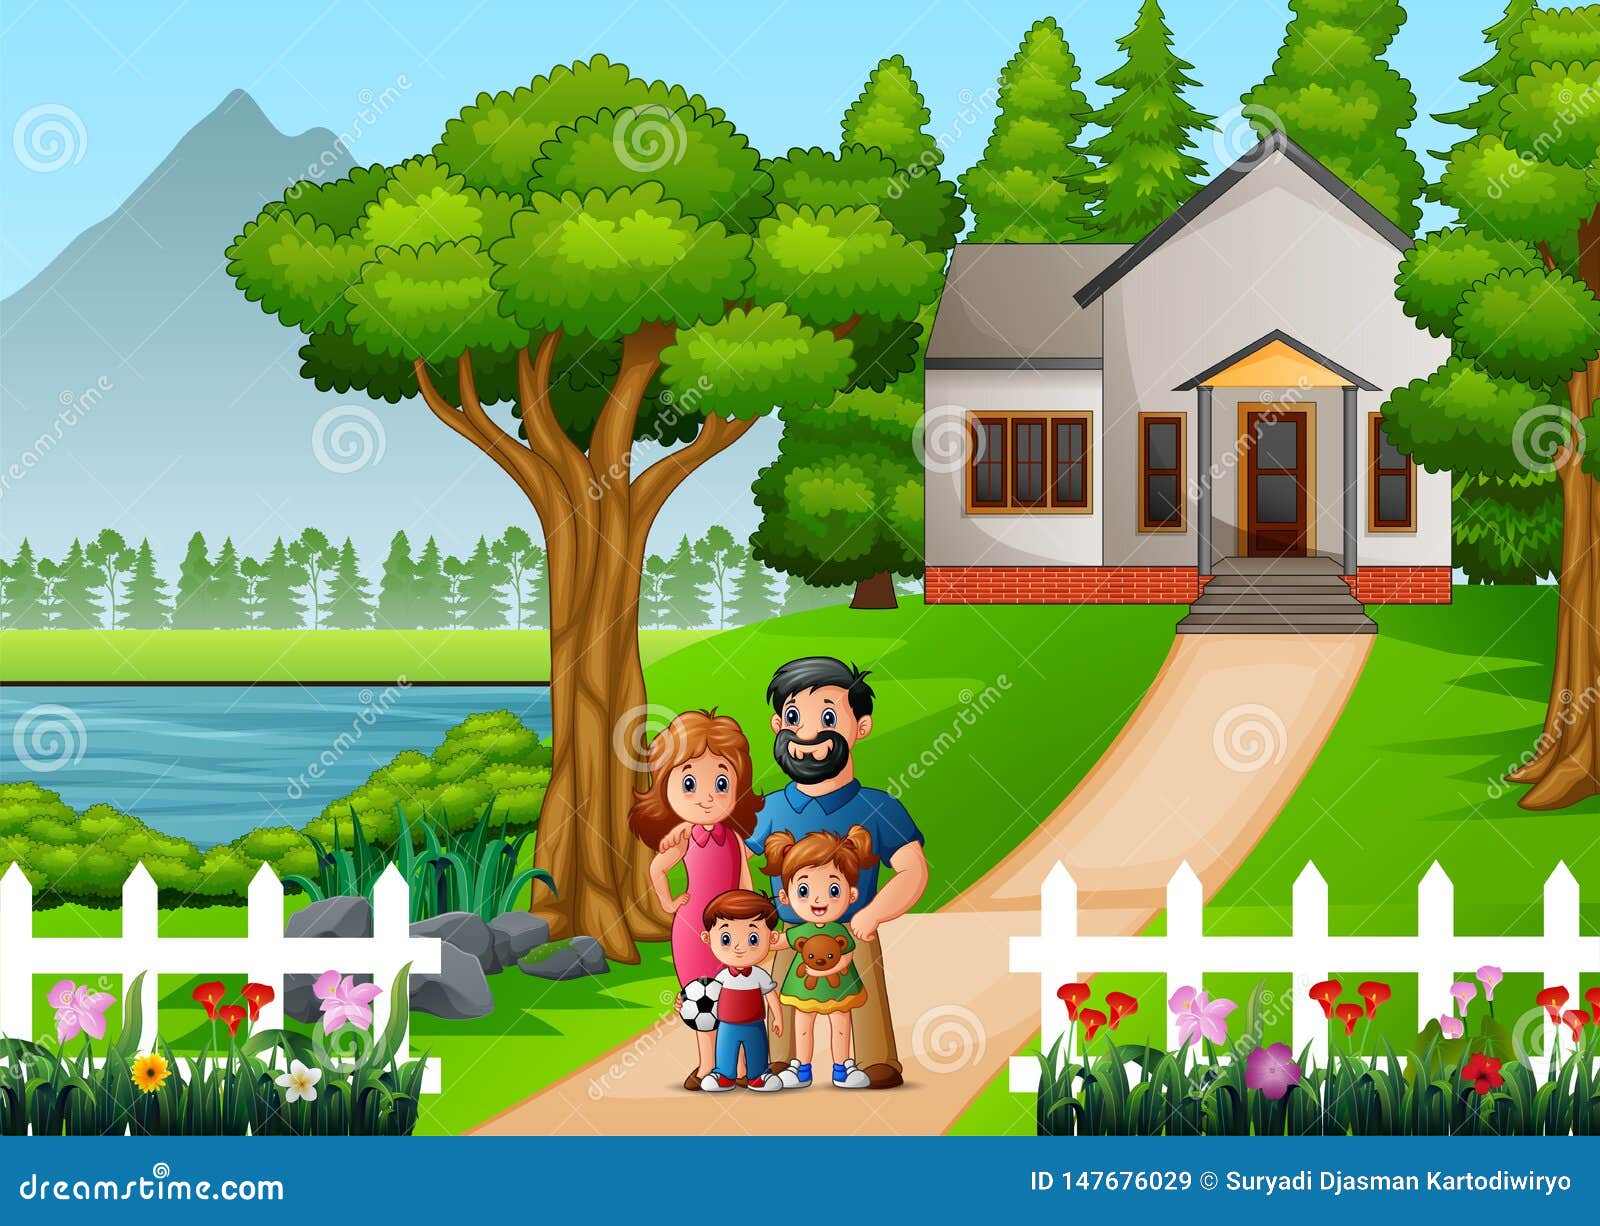 House With Yard And Trees Cartoon Royalty-Free Stock Photo